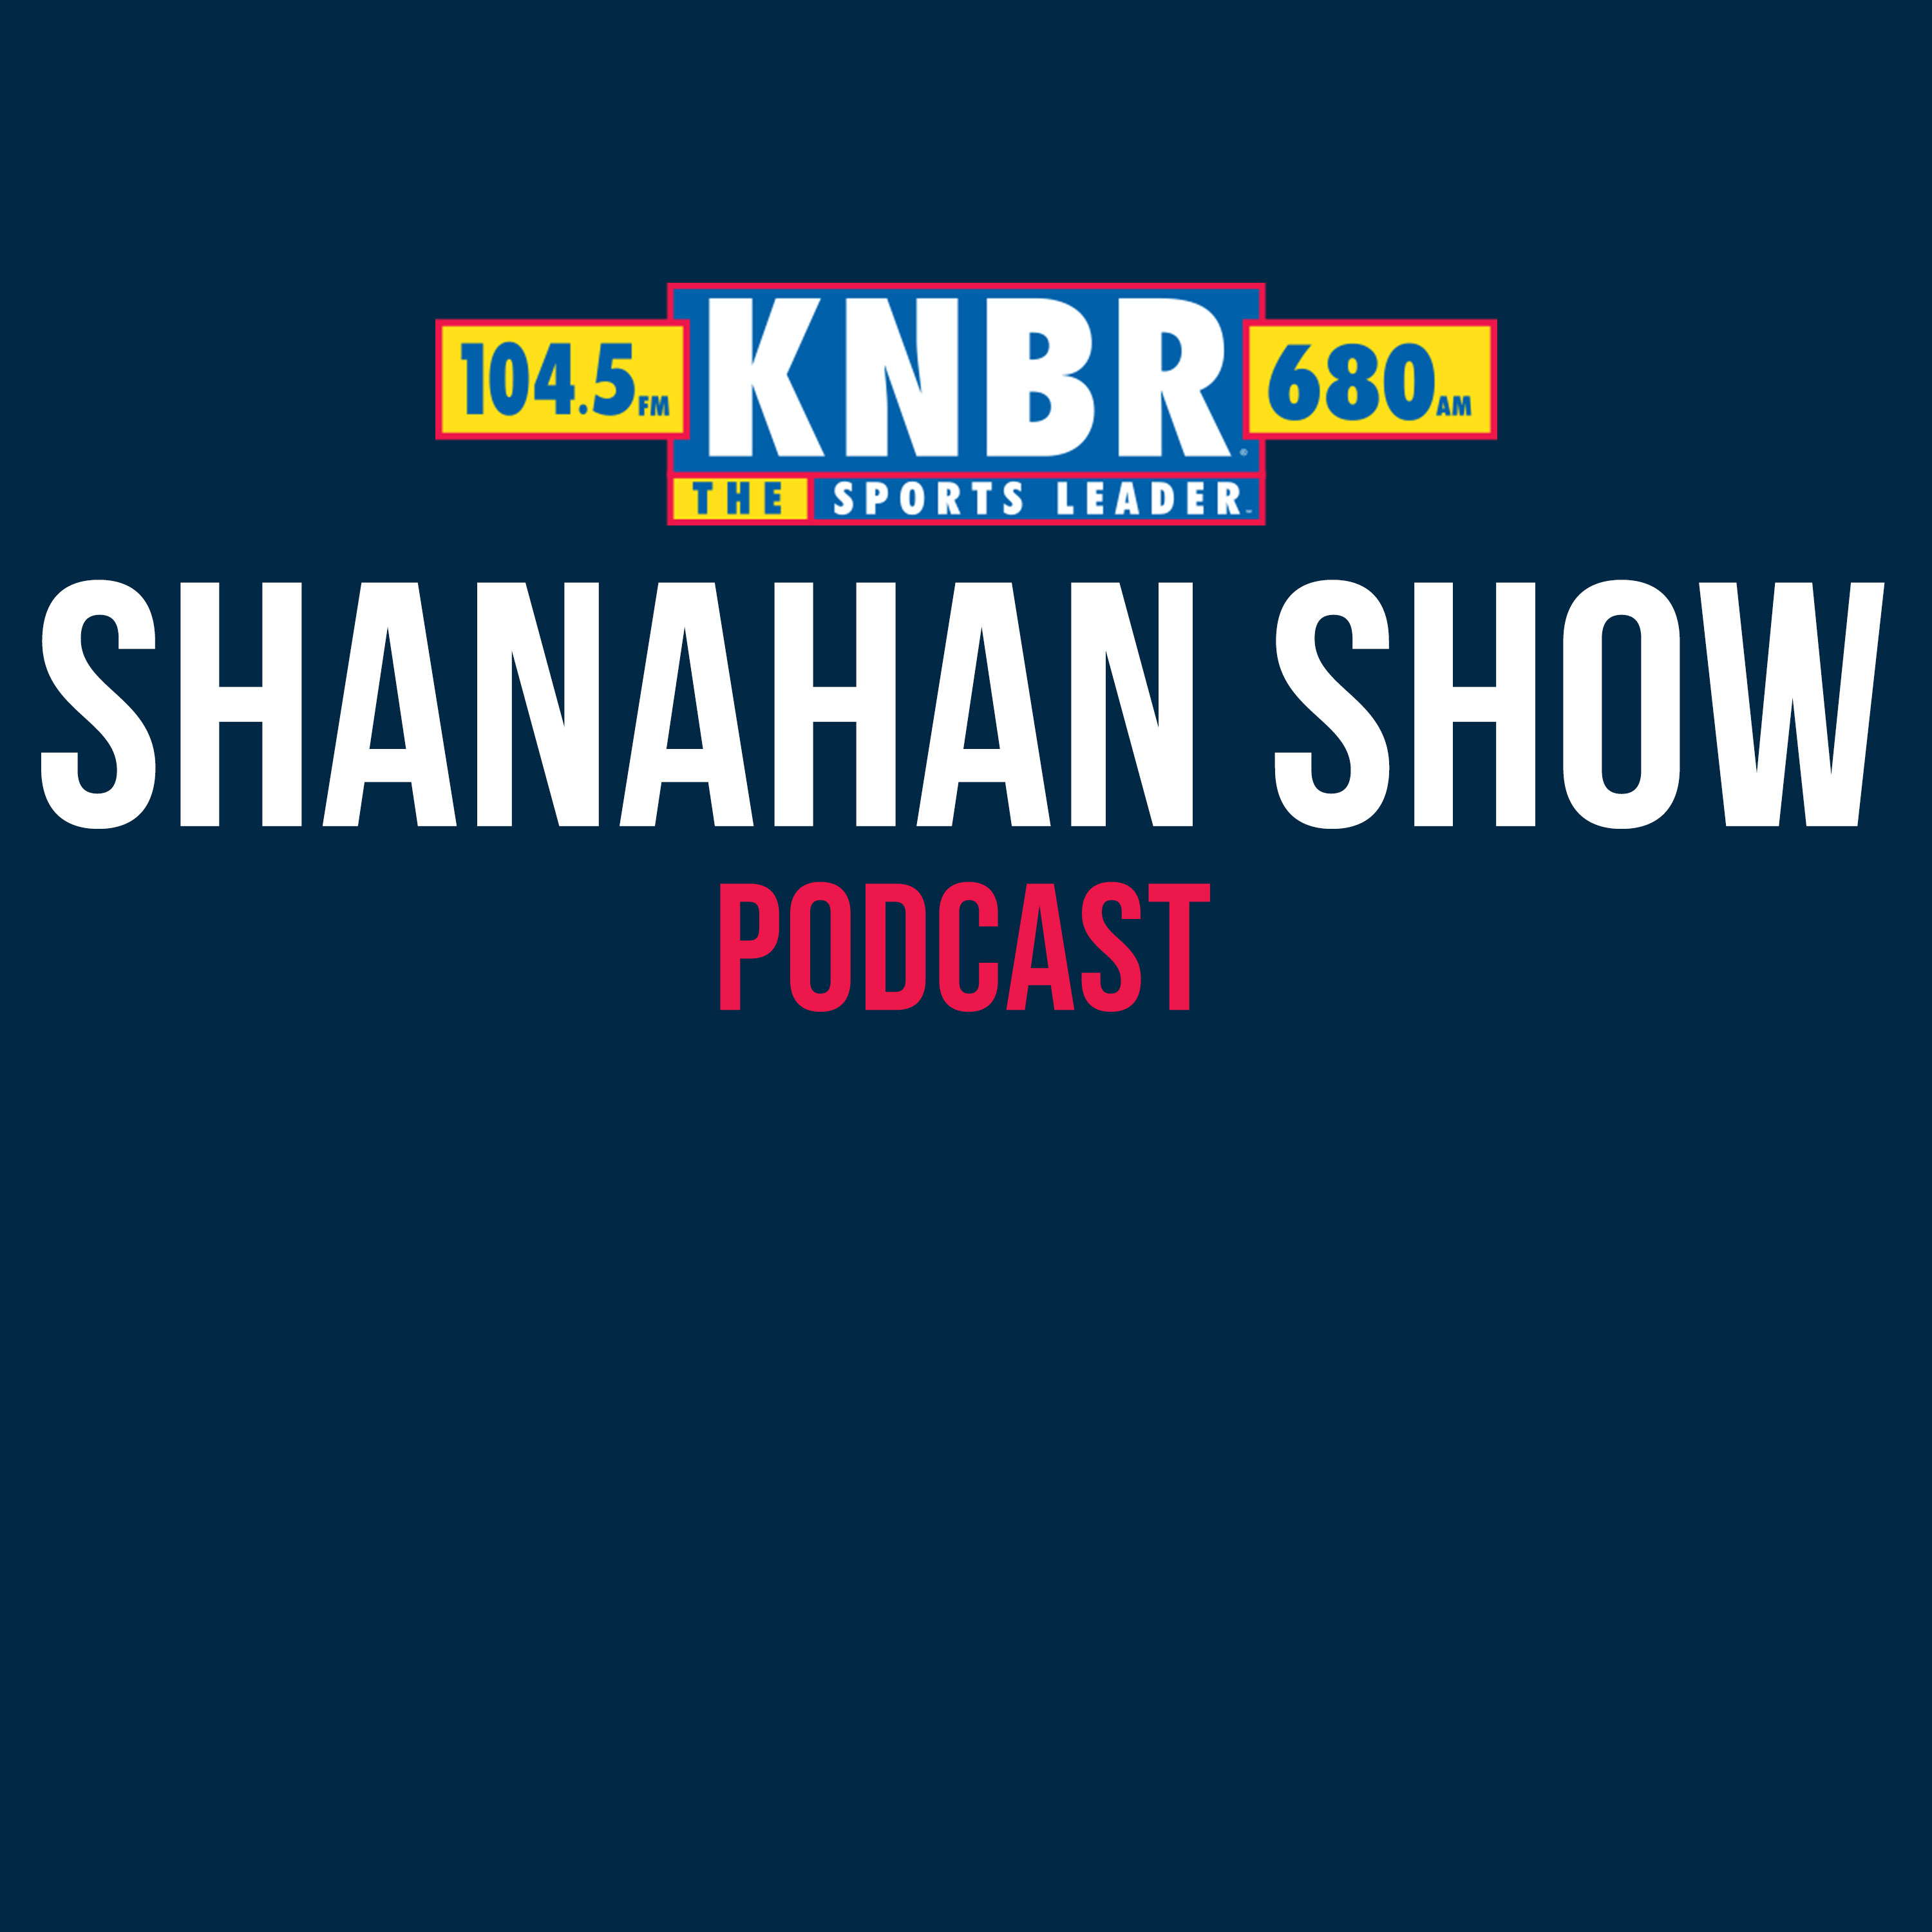 12-22 Kyle Shanahan joins Kerry Crowley & John Dickinson to discuss playing on Christmas & the matchup vs the Ravens